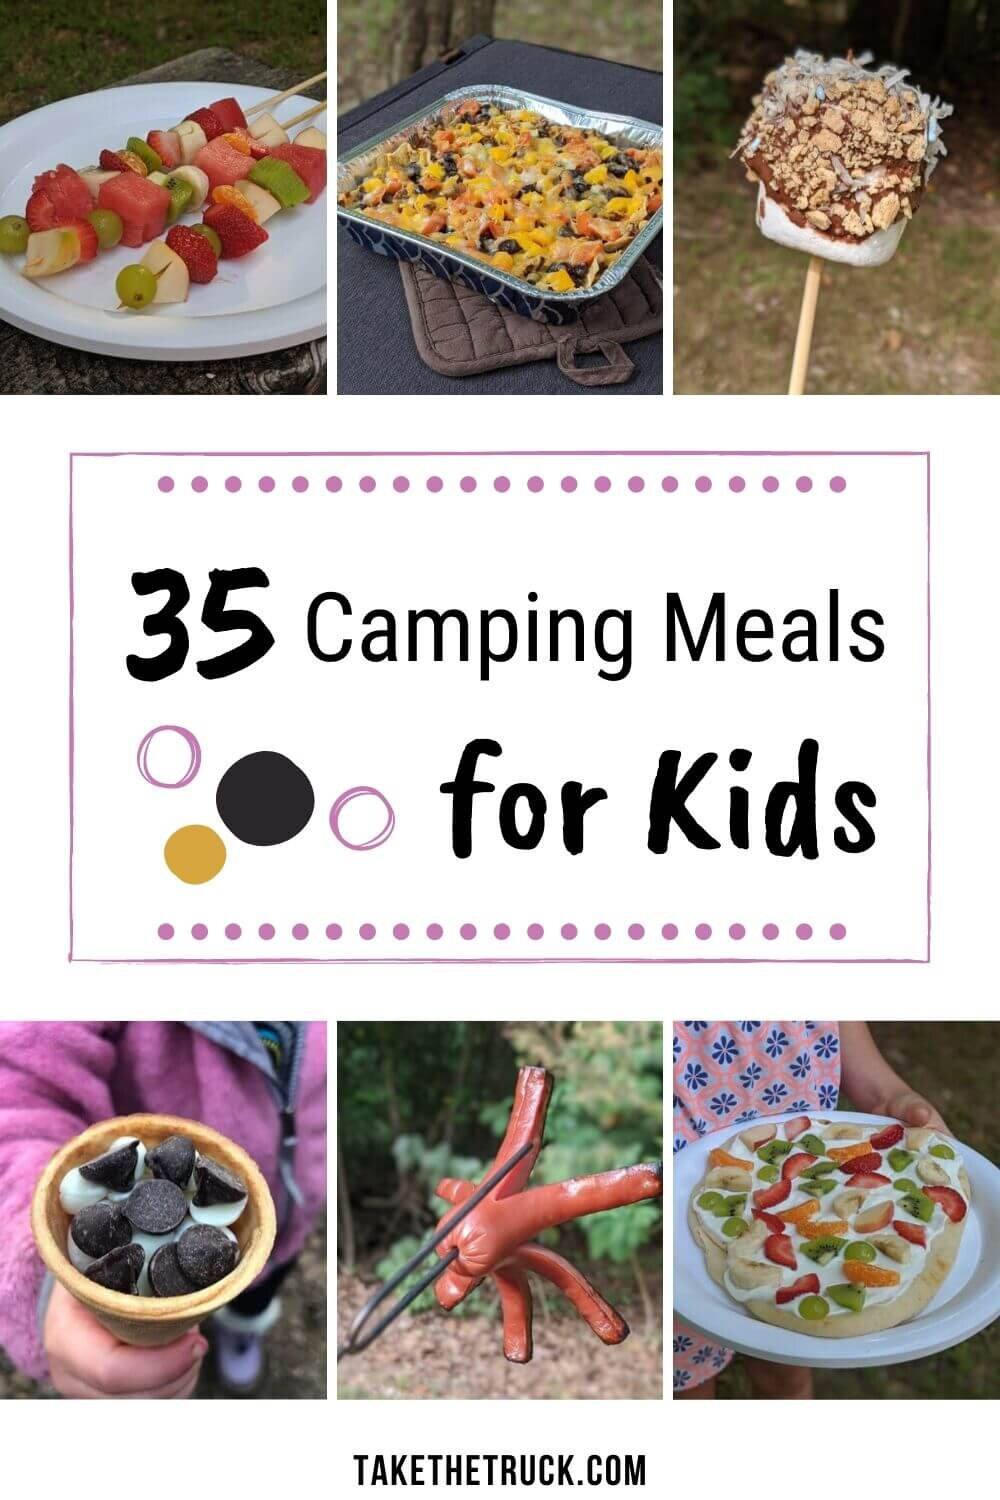 These 35 camping meals for kids are sorted into camping breakfasts, lunches, dinners, plus healthy camping snacks and fun kid friendly desserts. Lots of fun camping food ideas for kids!